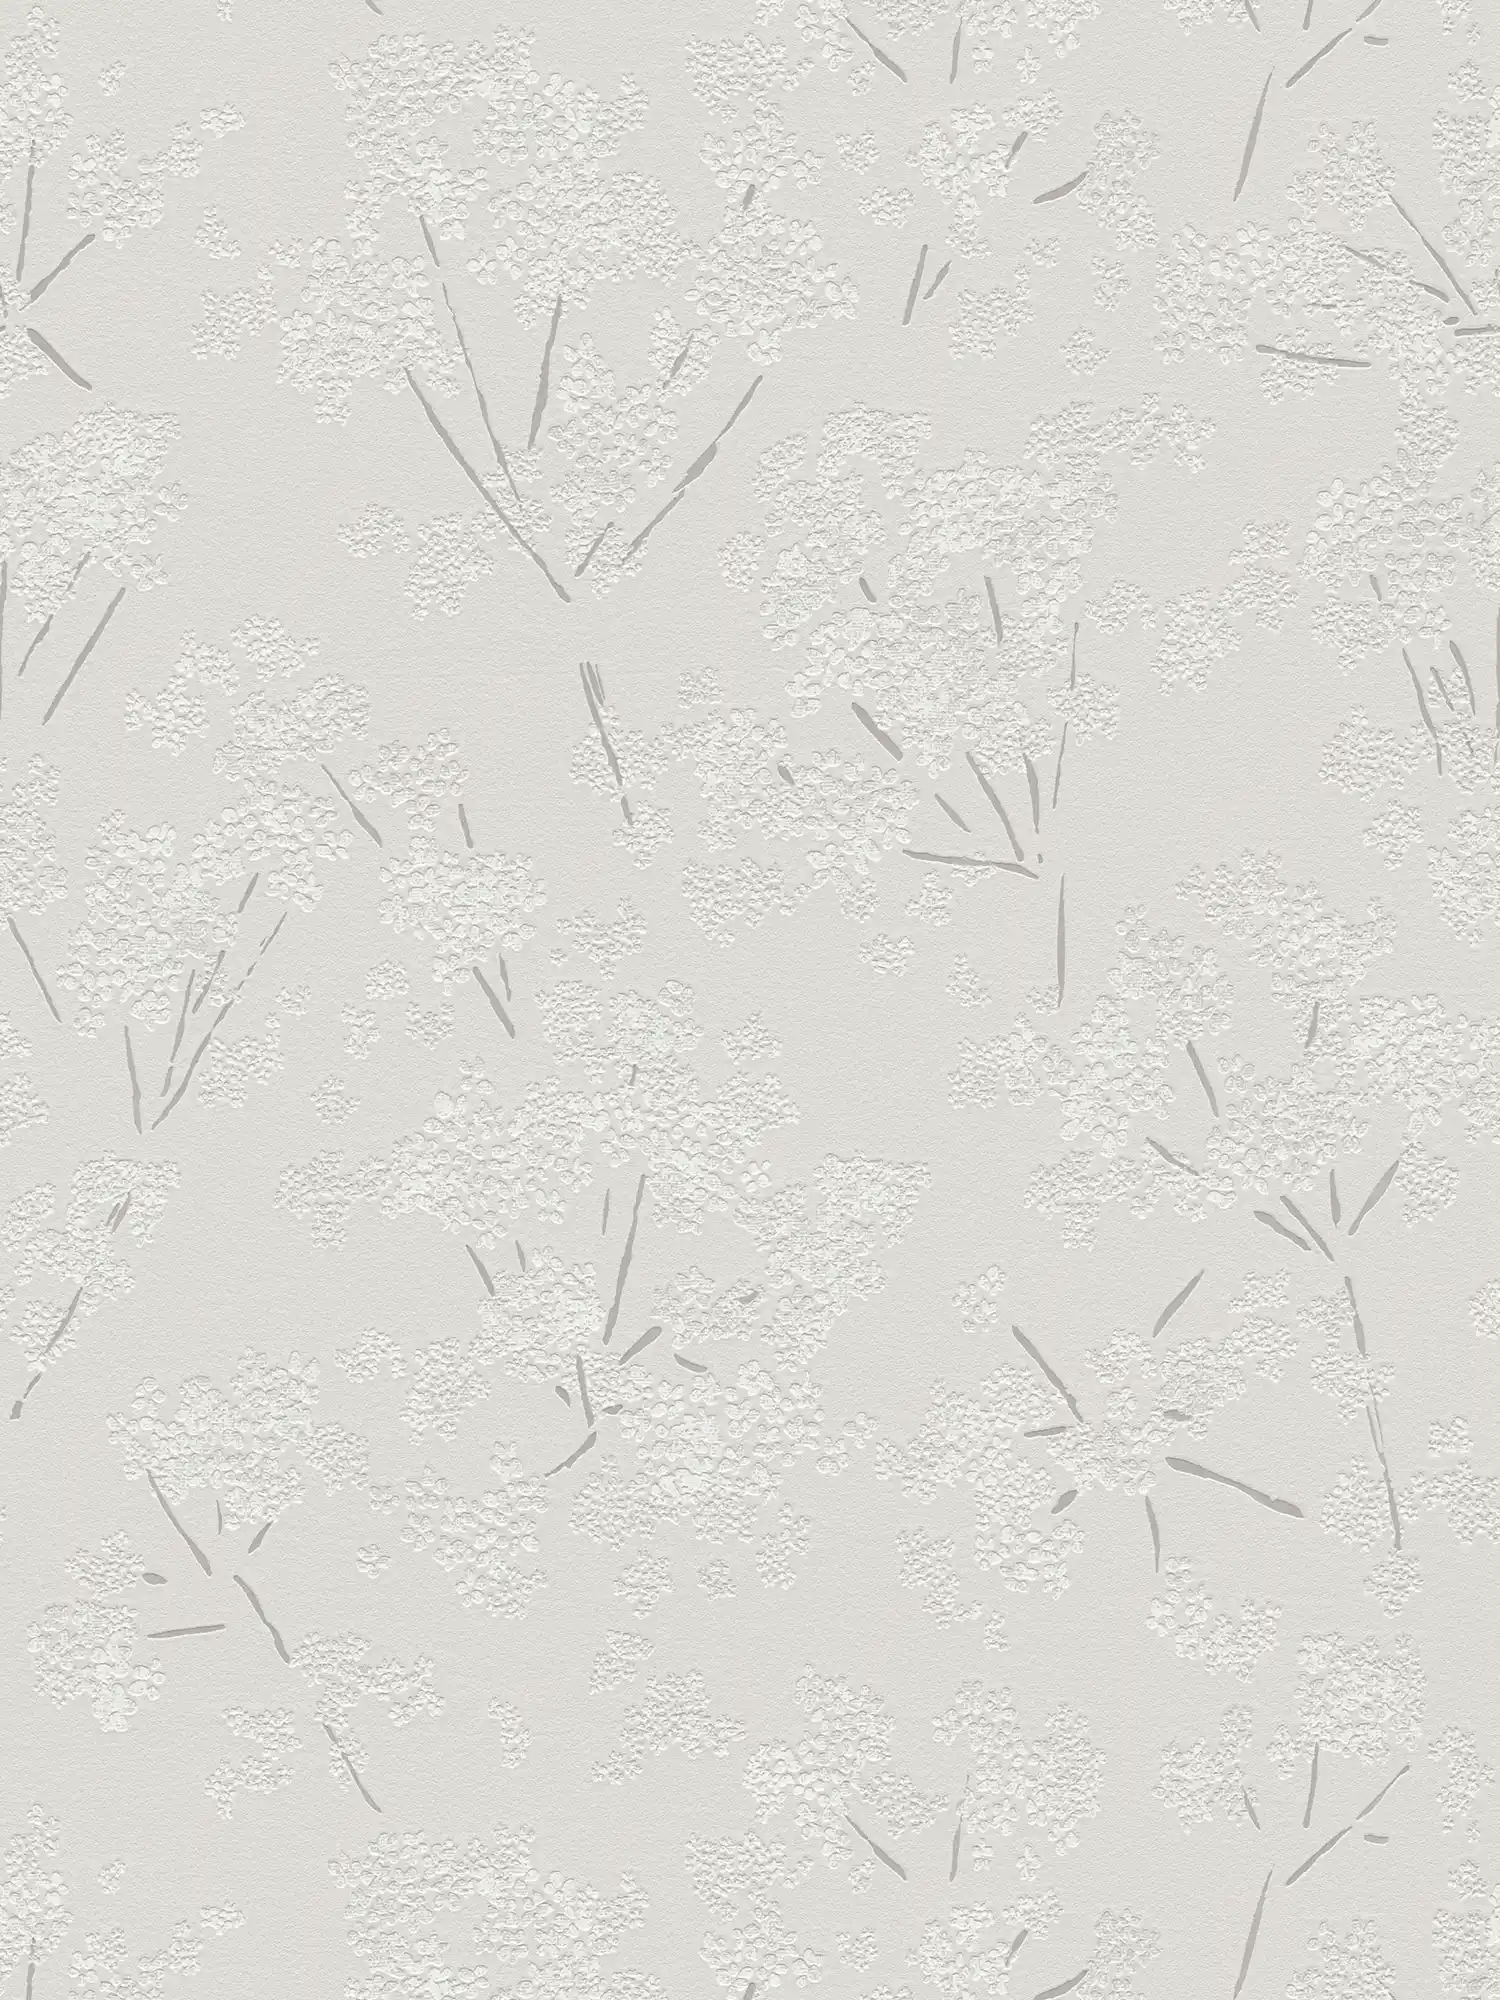 Non-woven wallpaper with abstract floral pattern - grey, white
